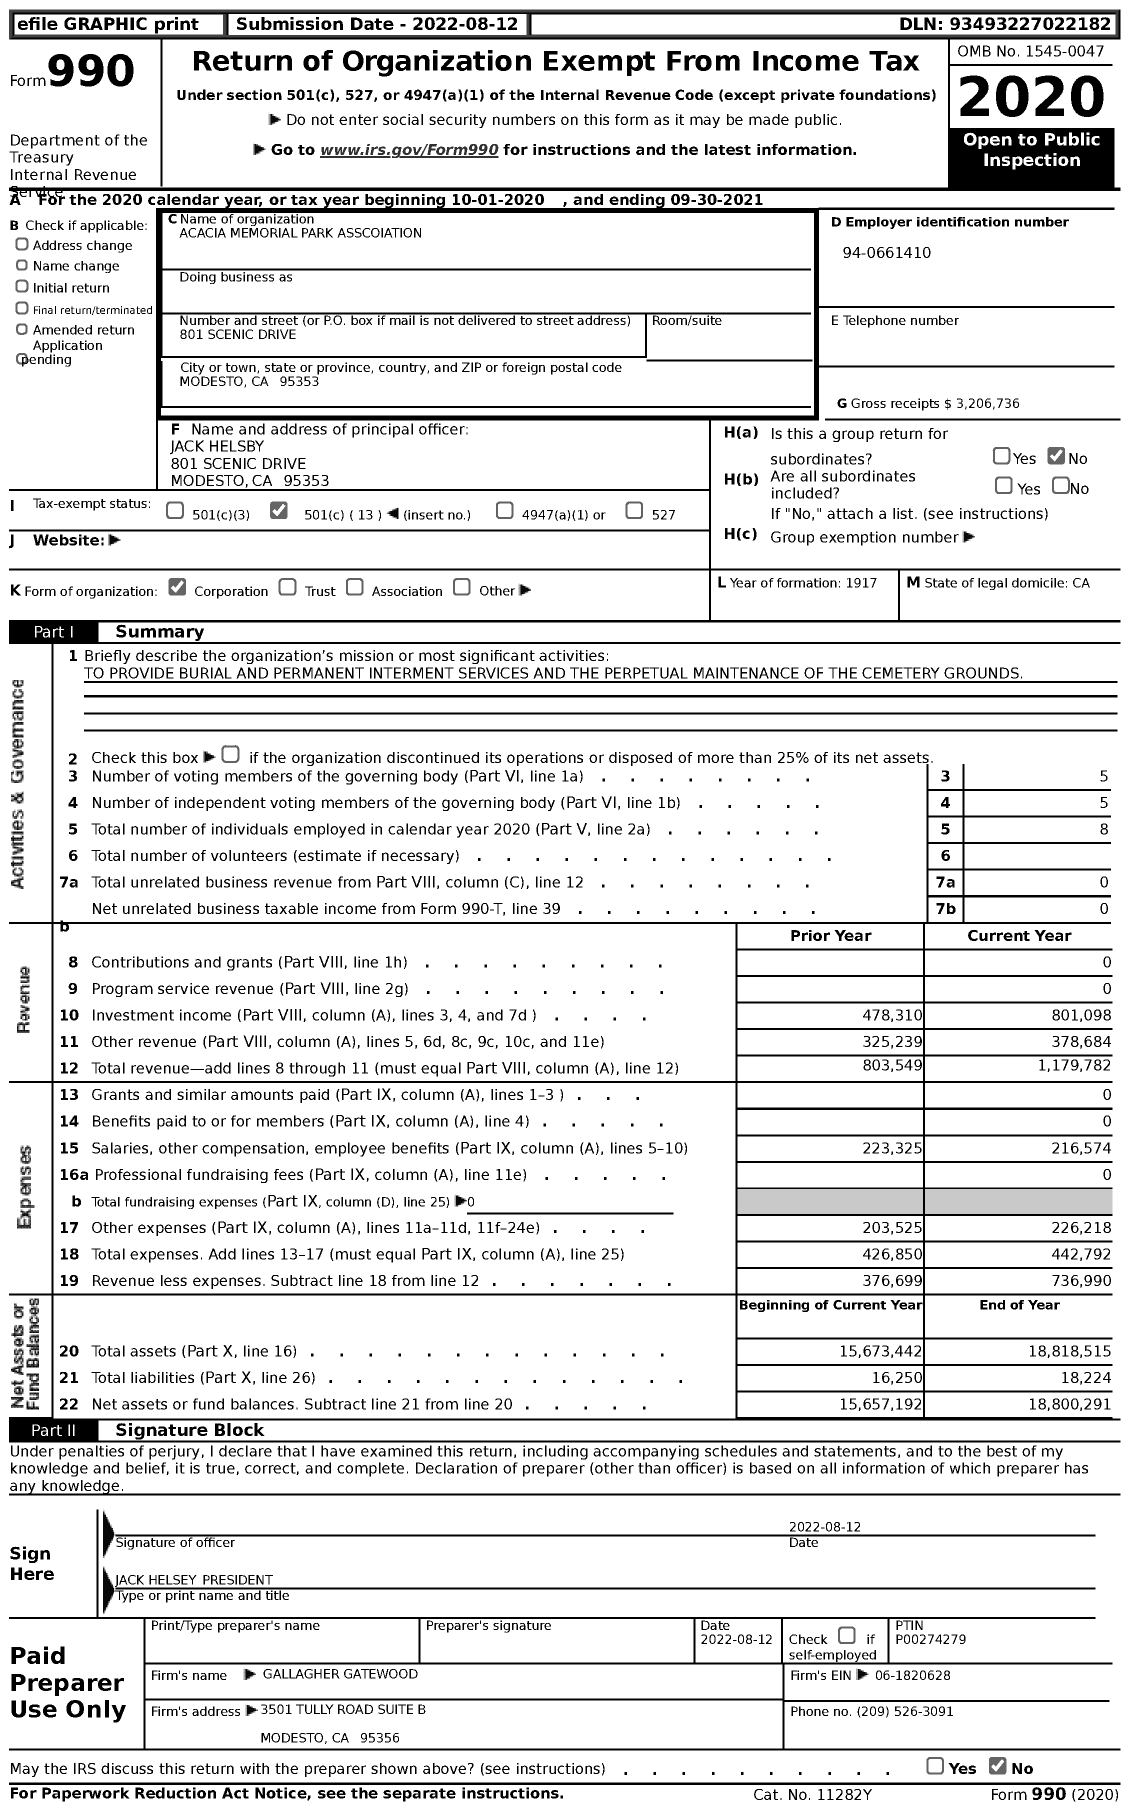 Image of first page of 2020 Form 990 for Acacia Memorial Park Association